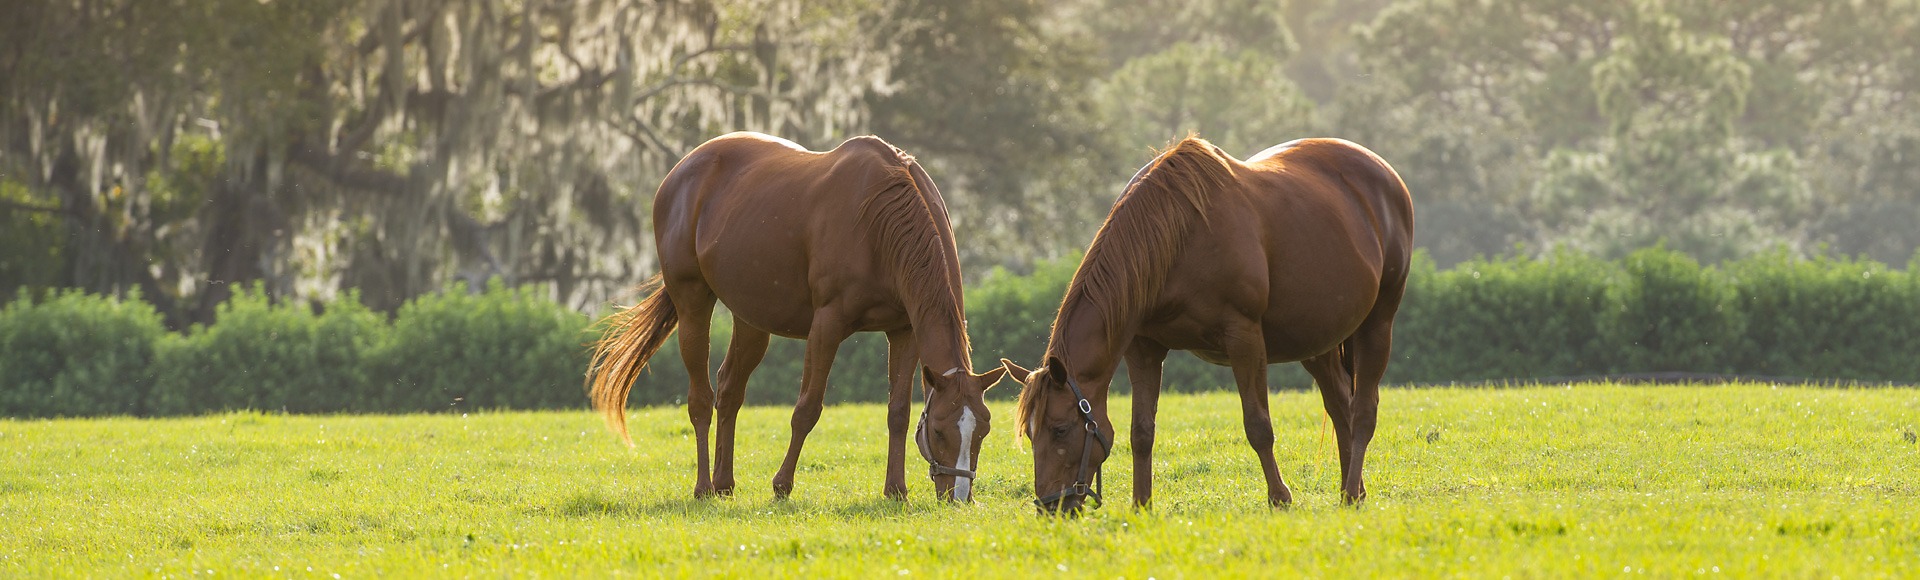 Horses grazing in a field in Sorrento Florida